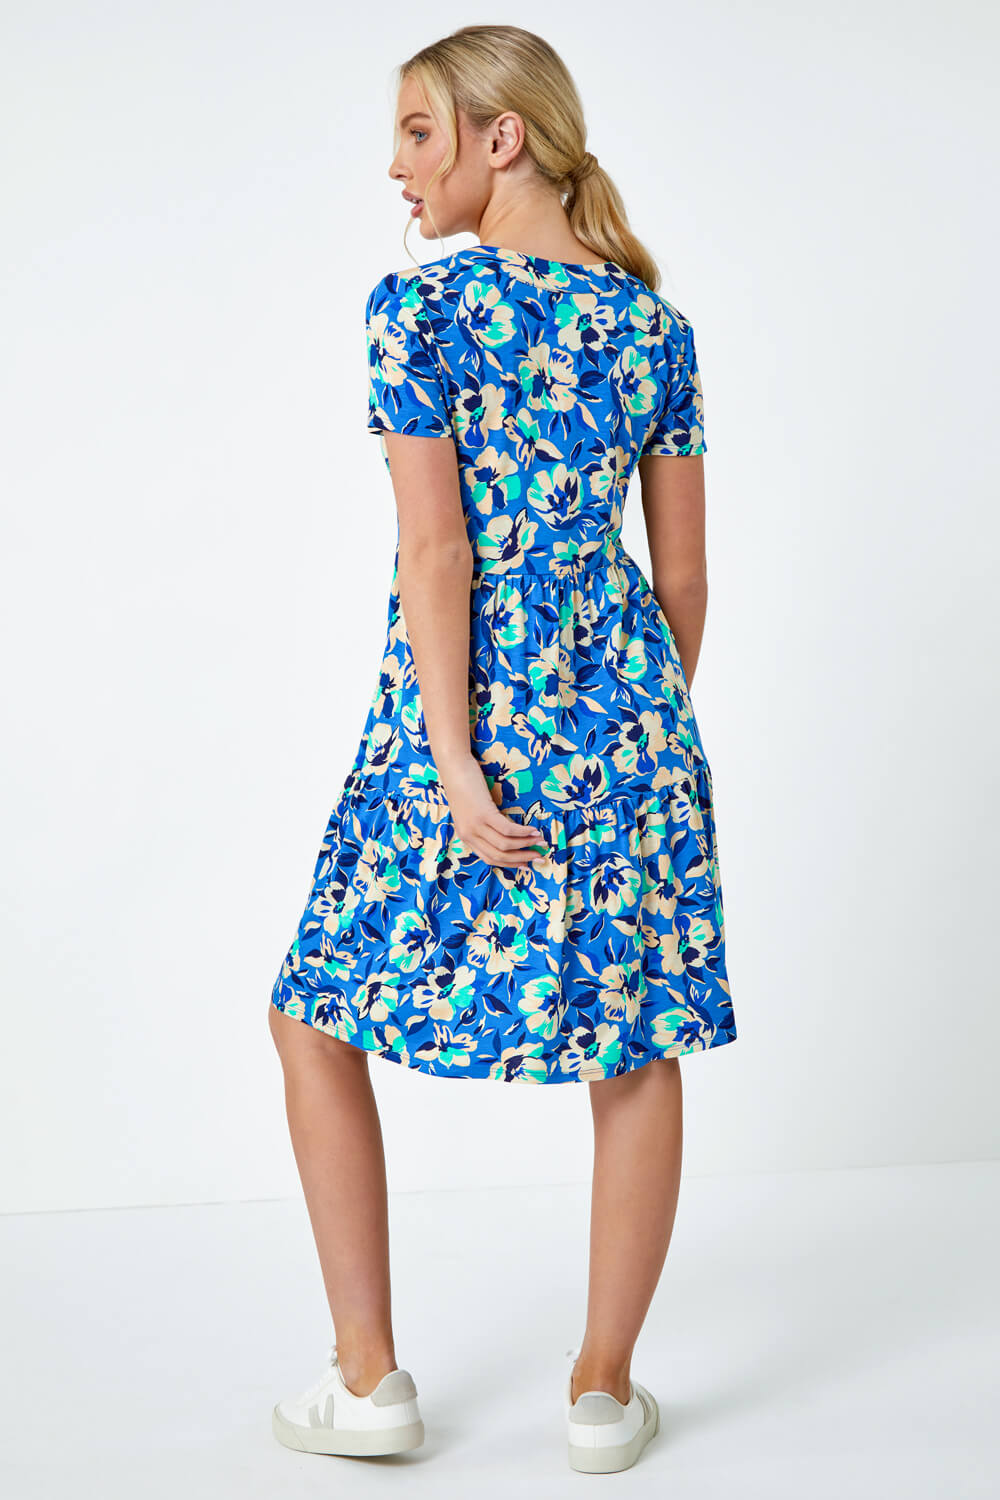 Turquoise Petite Tiered Floral Stretch T-Shirt Dress, Image 3 of 5